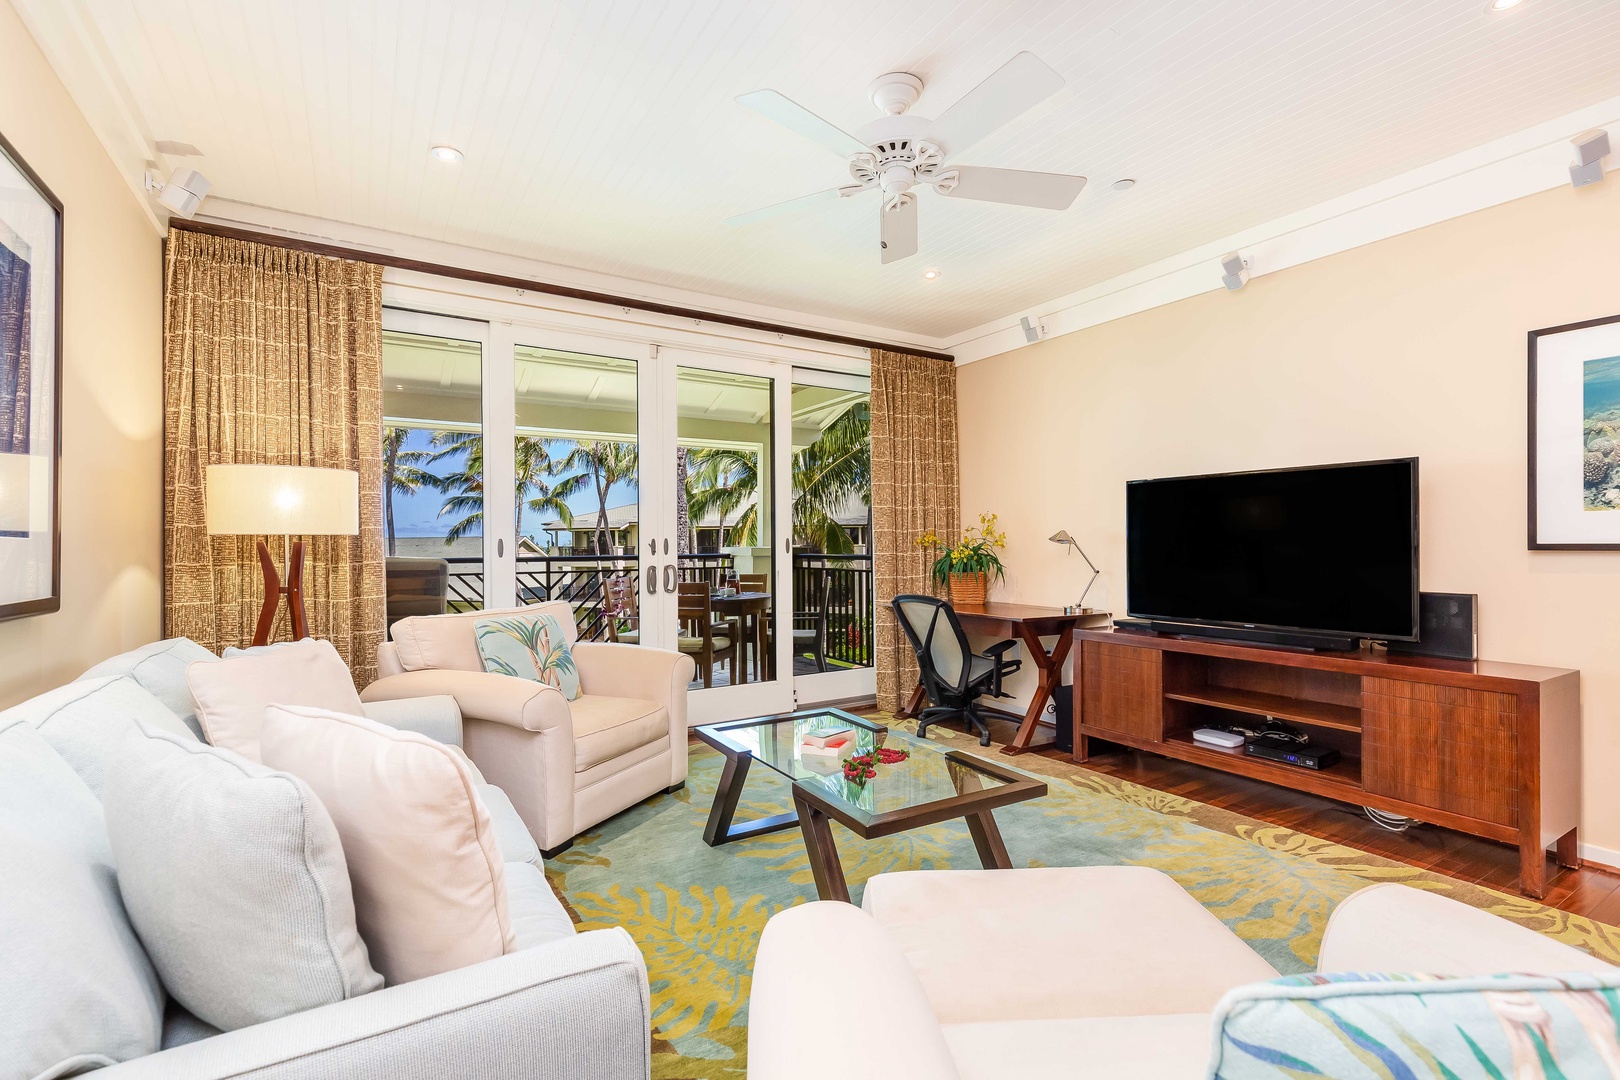 Kahuku Vacation Rentals, Turtle Bay Villas 308 - Open-concept living with direct access to lanai